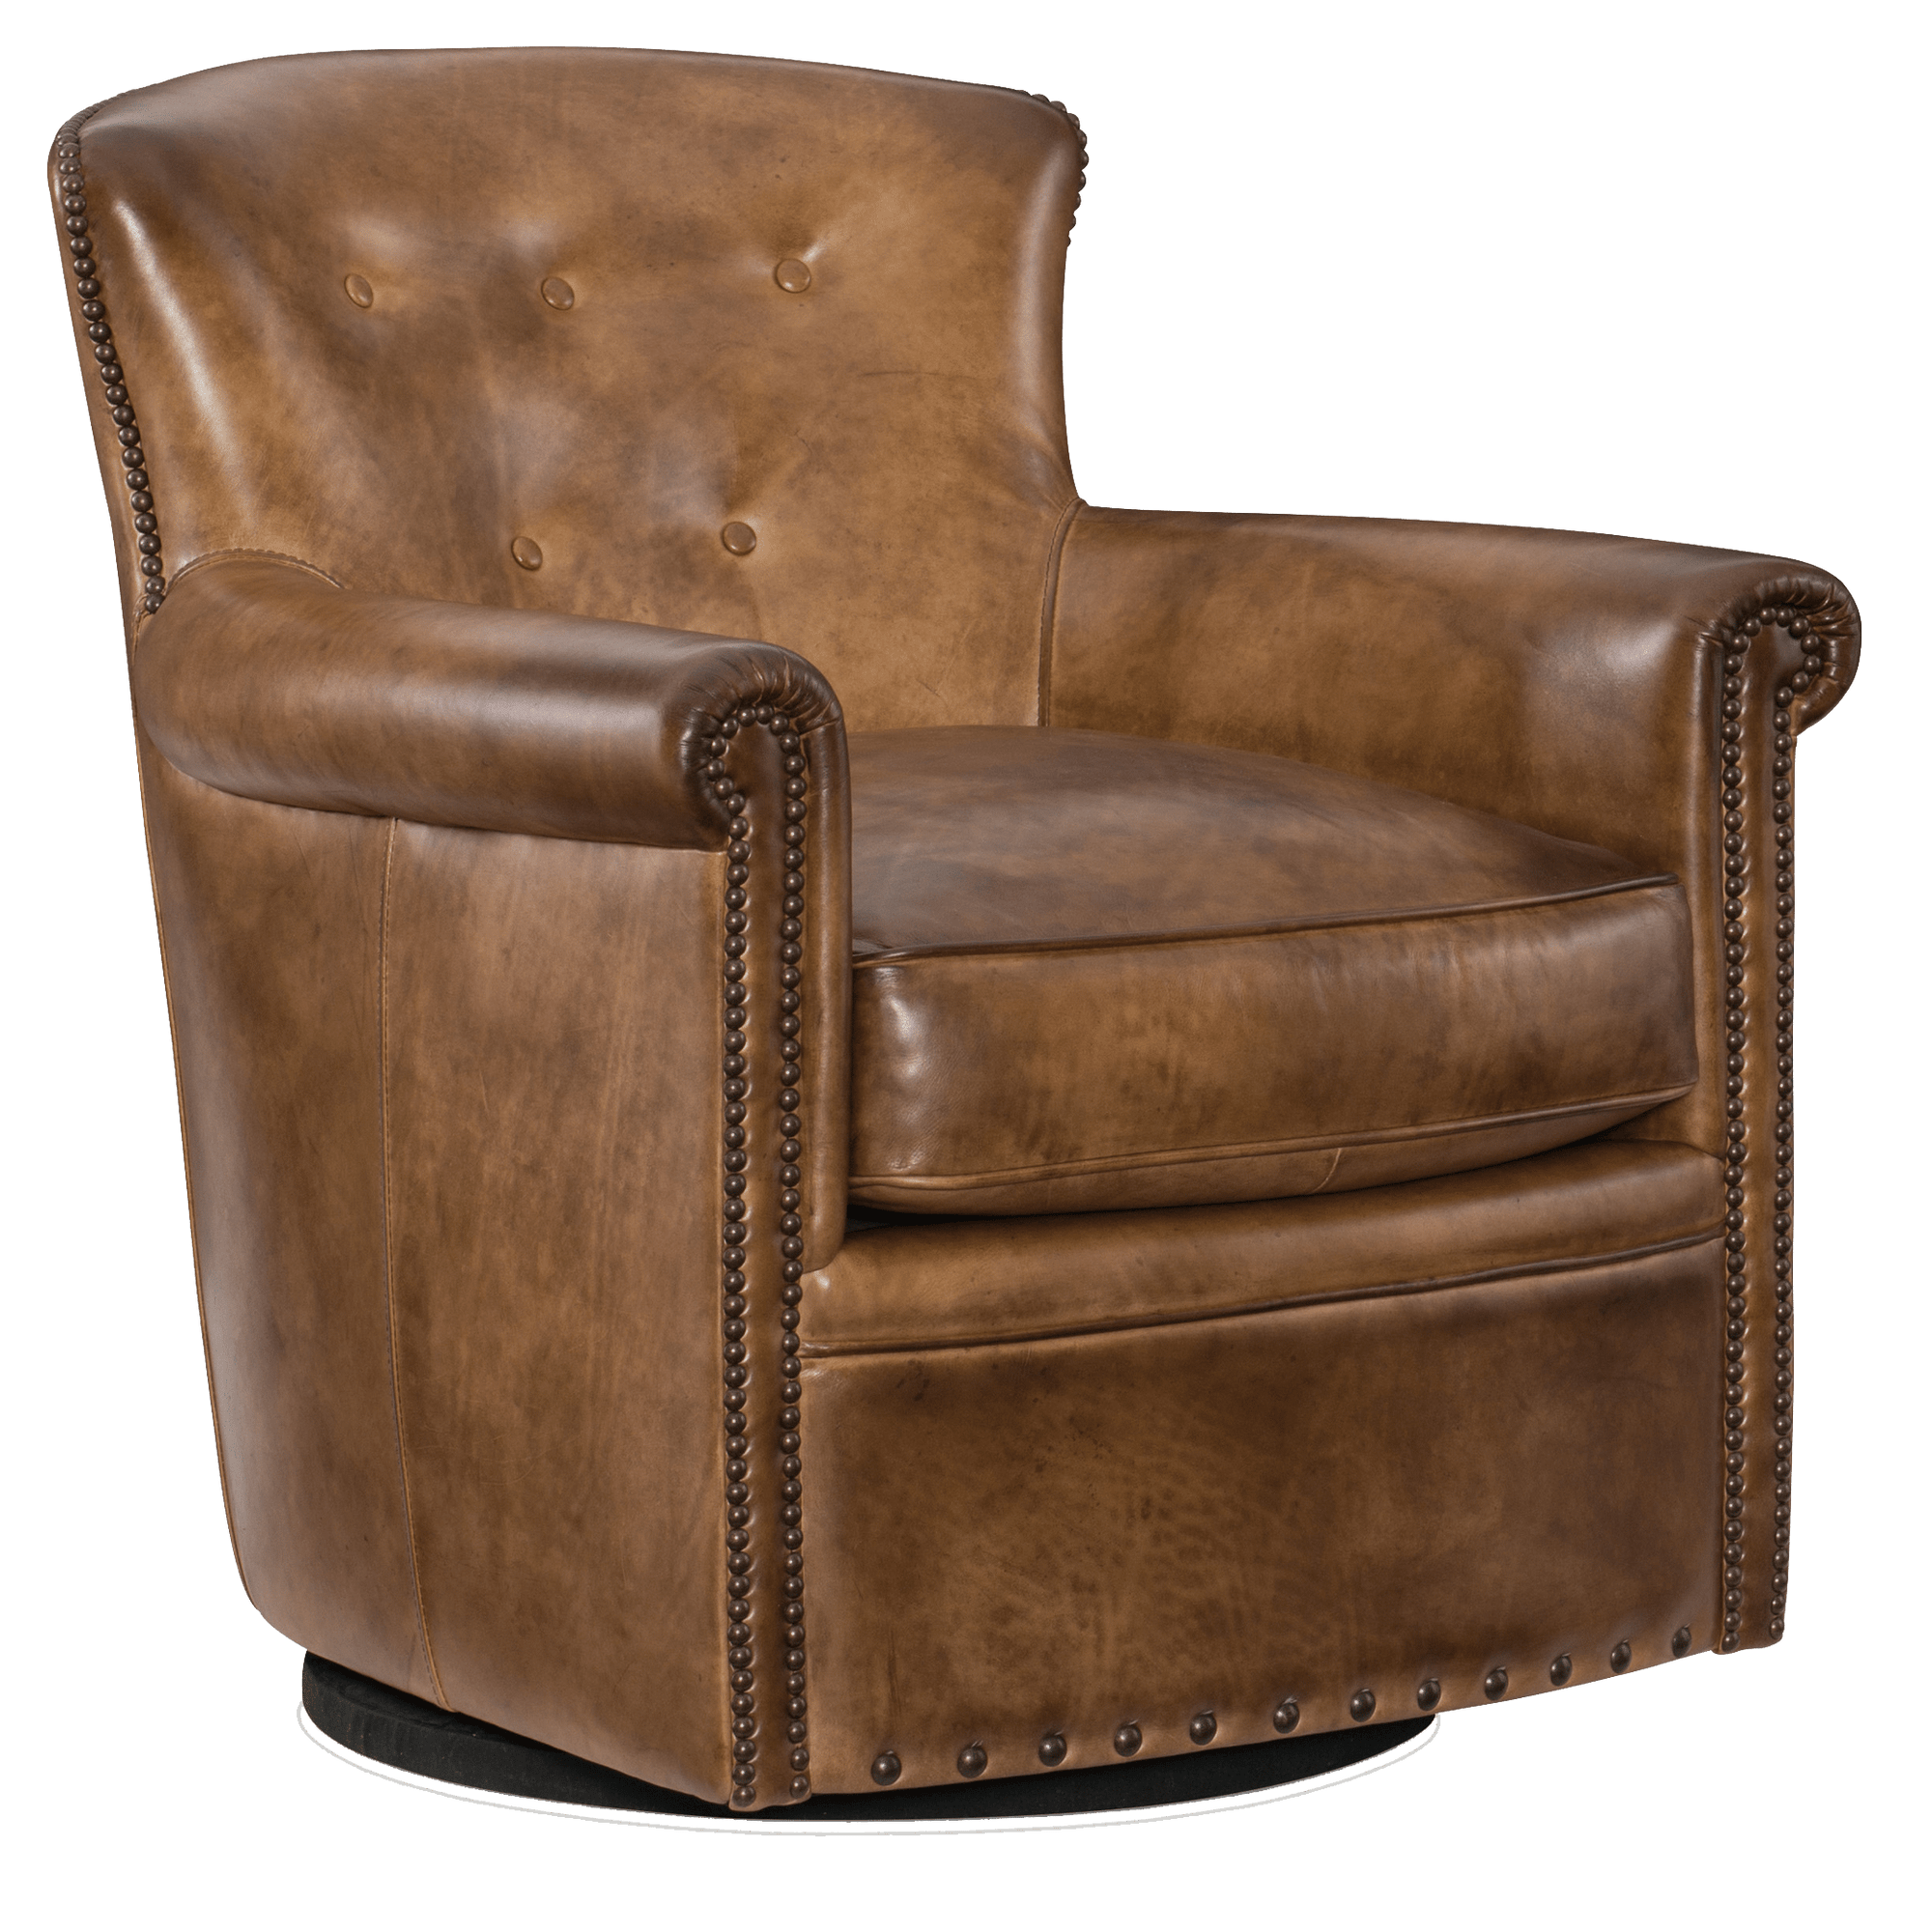 Journee 29" Wide Side Chair, Leather, Brown